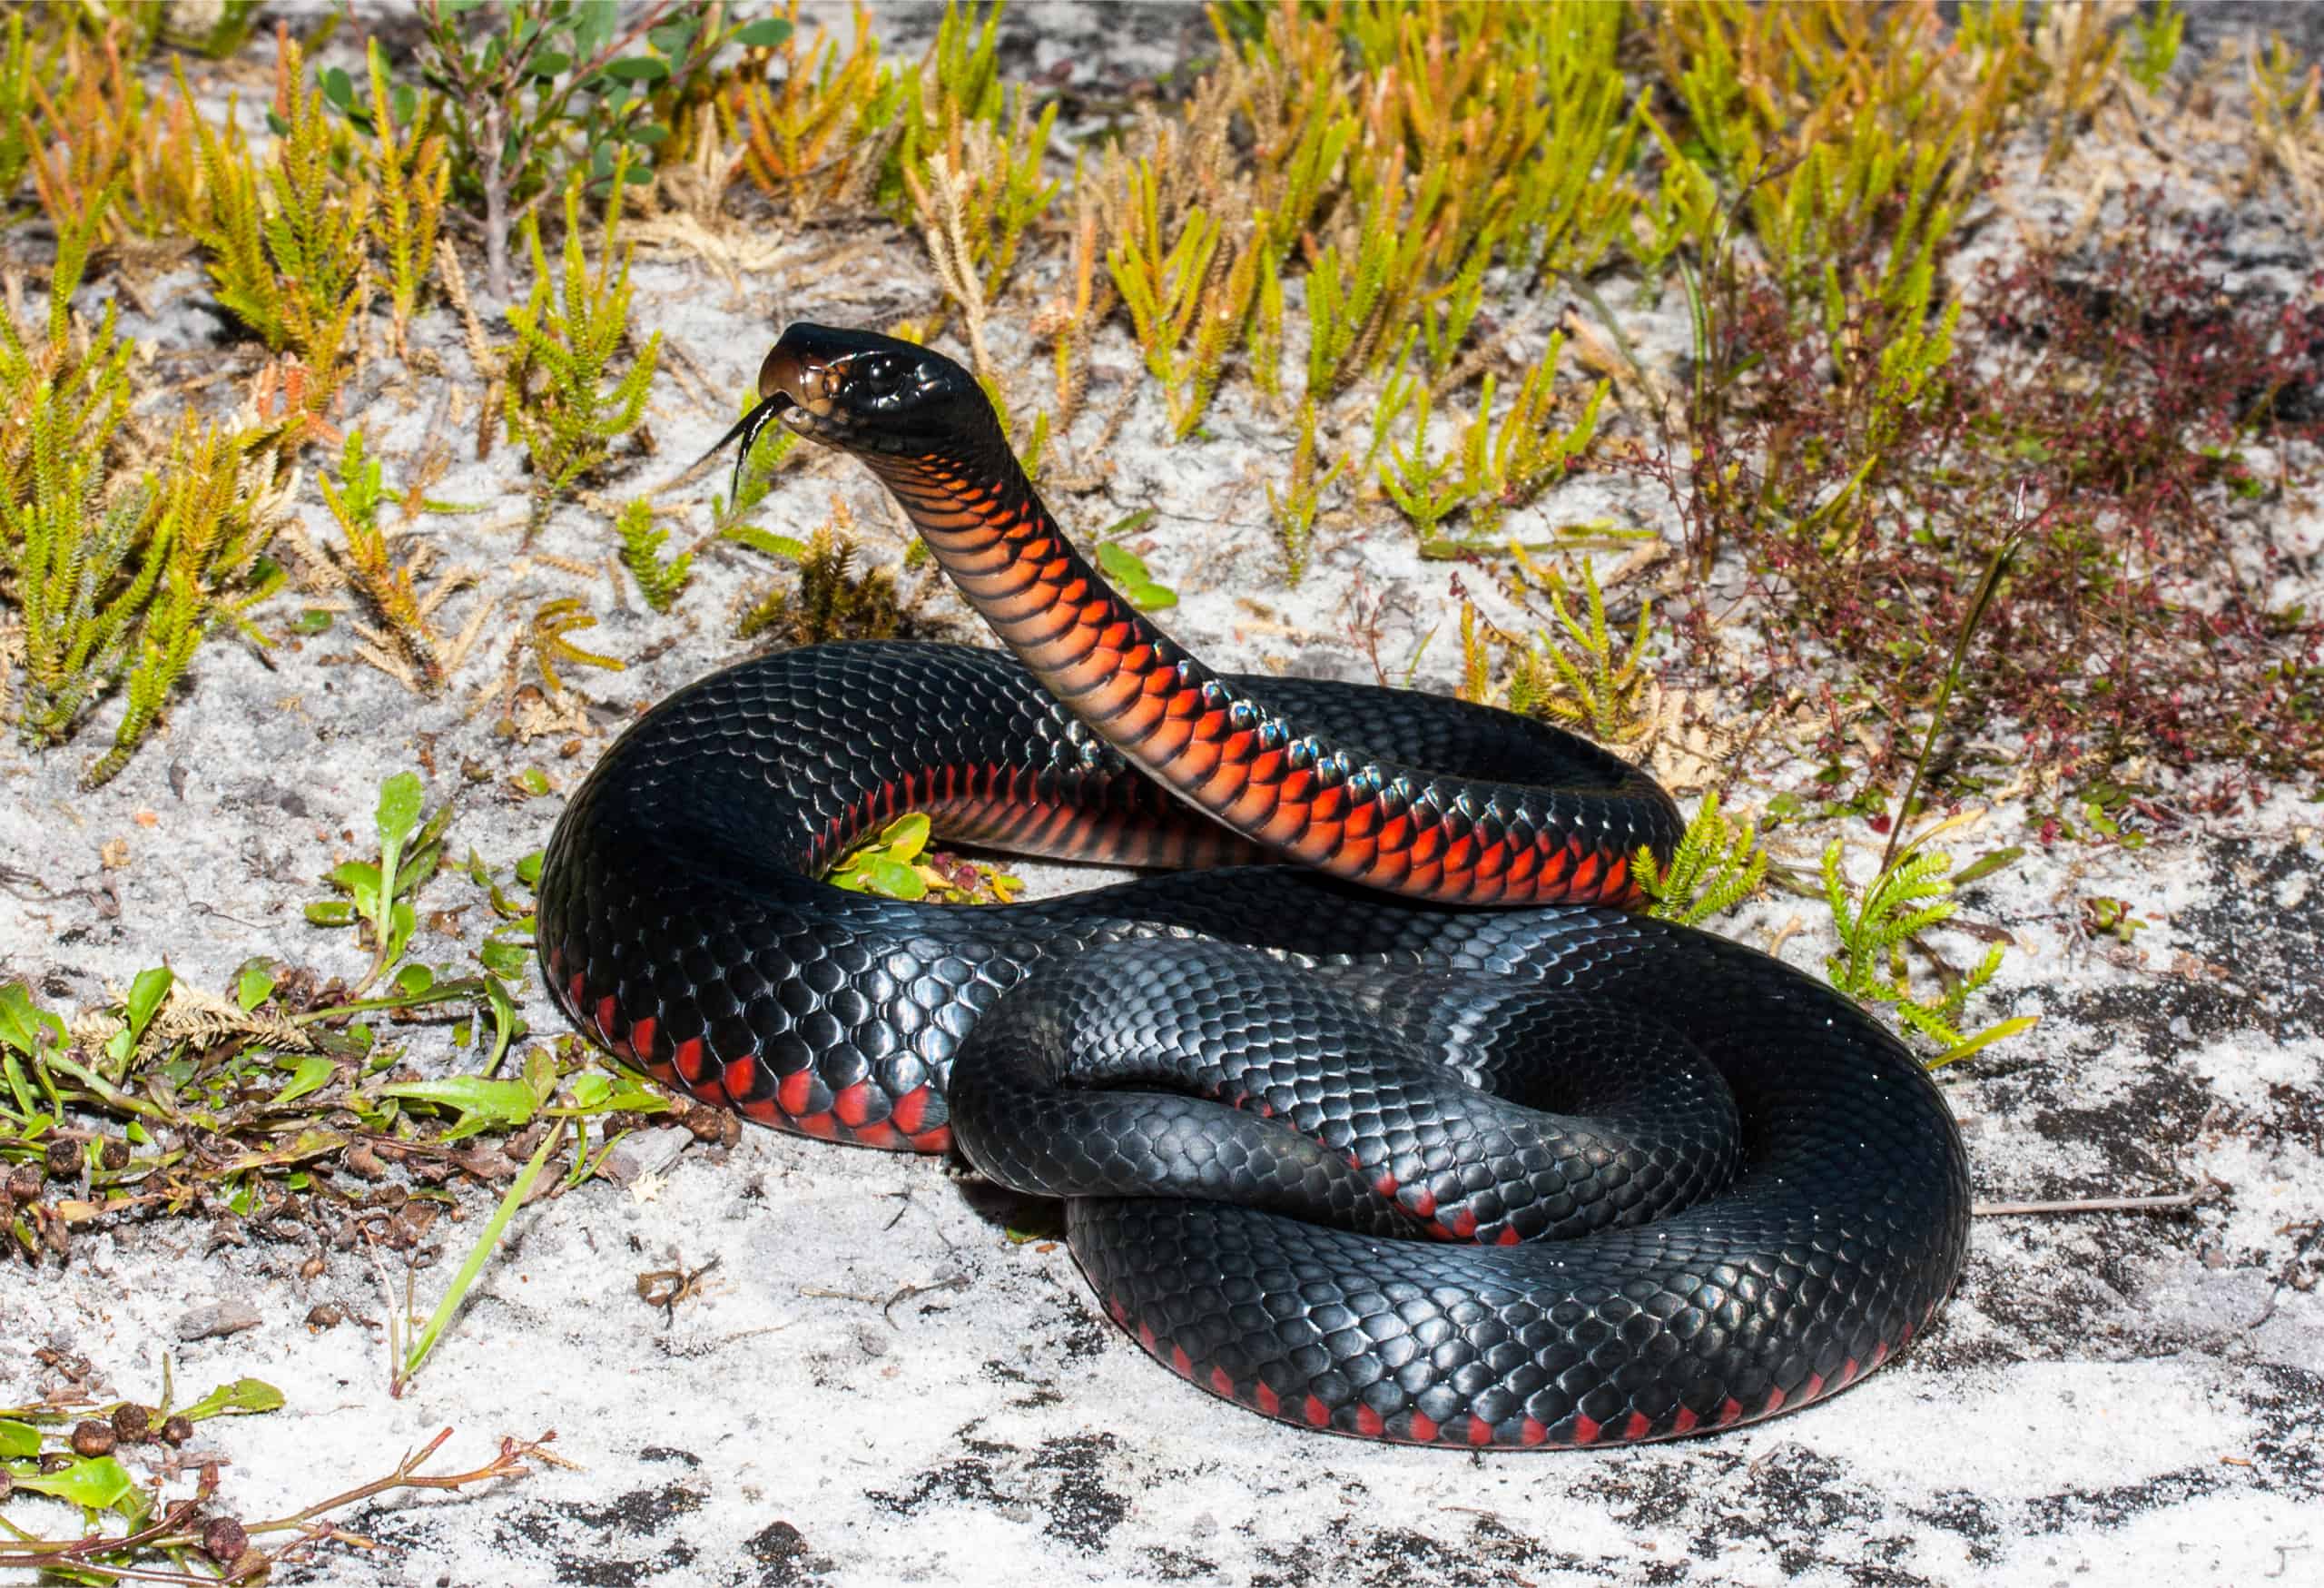 Red-Bellied Black Snake Animal Facts | Pseudechis porphyriacus - AZ